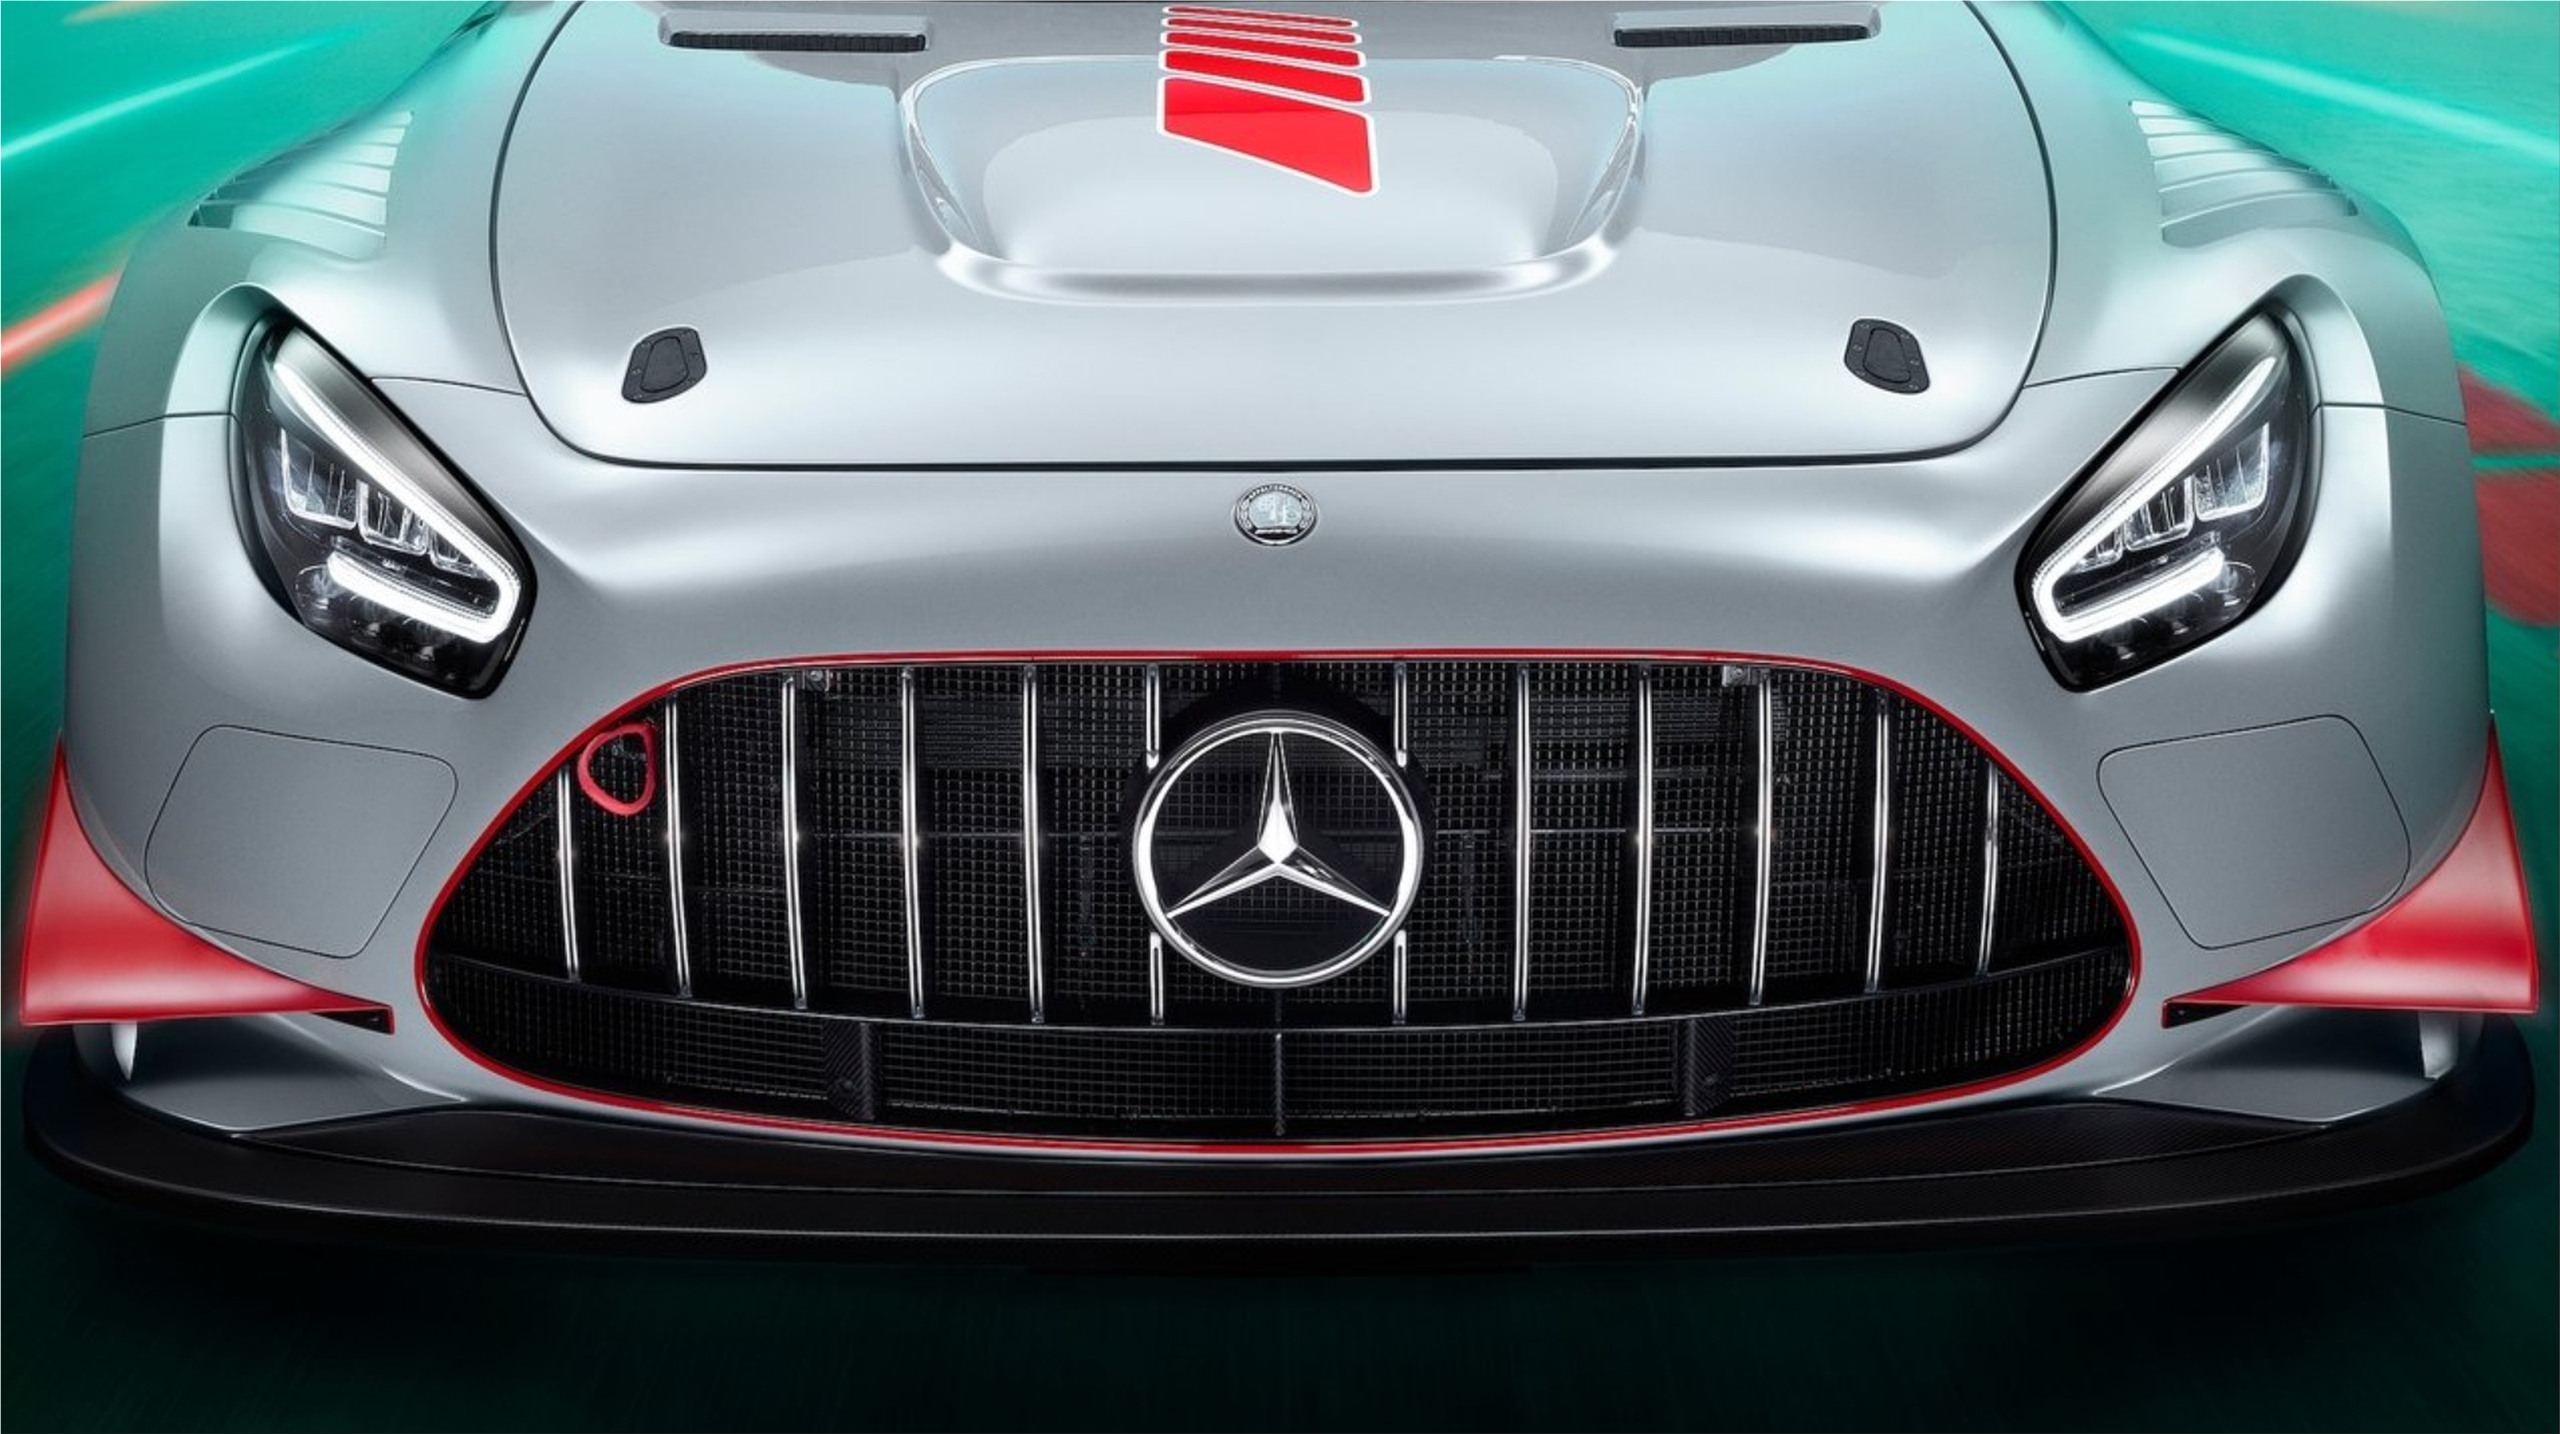 The Mercedes-AMG GT3 Edition 55 race car from $622,000